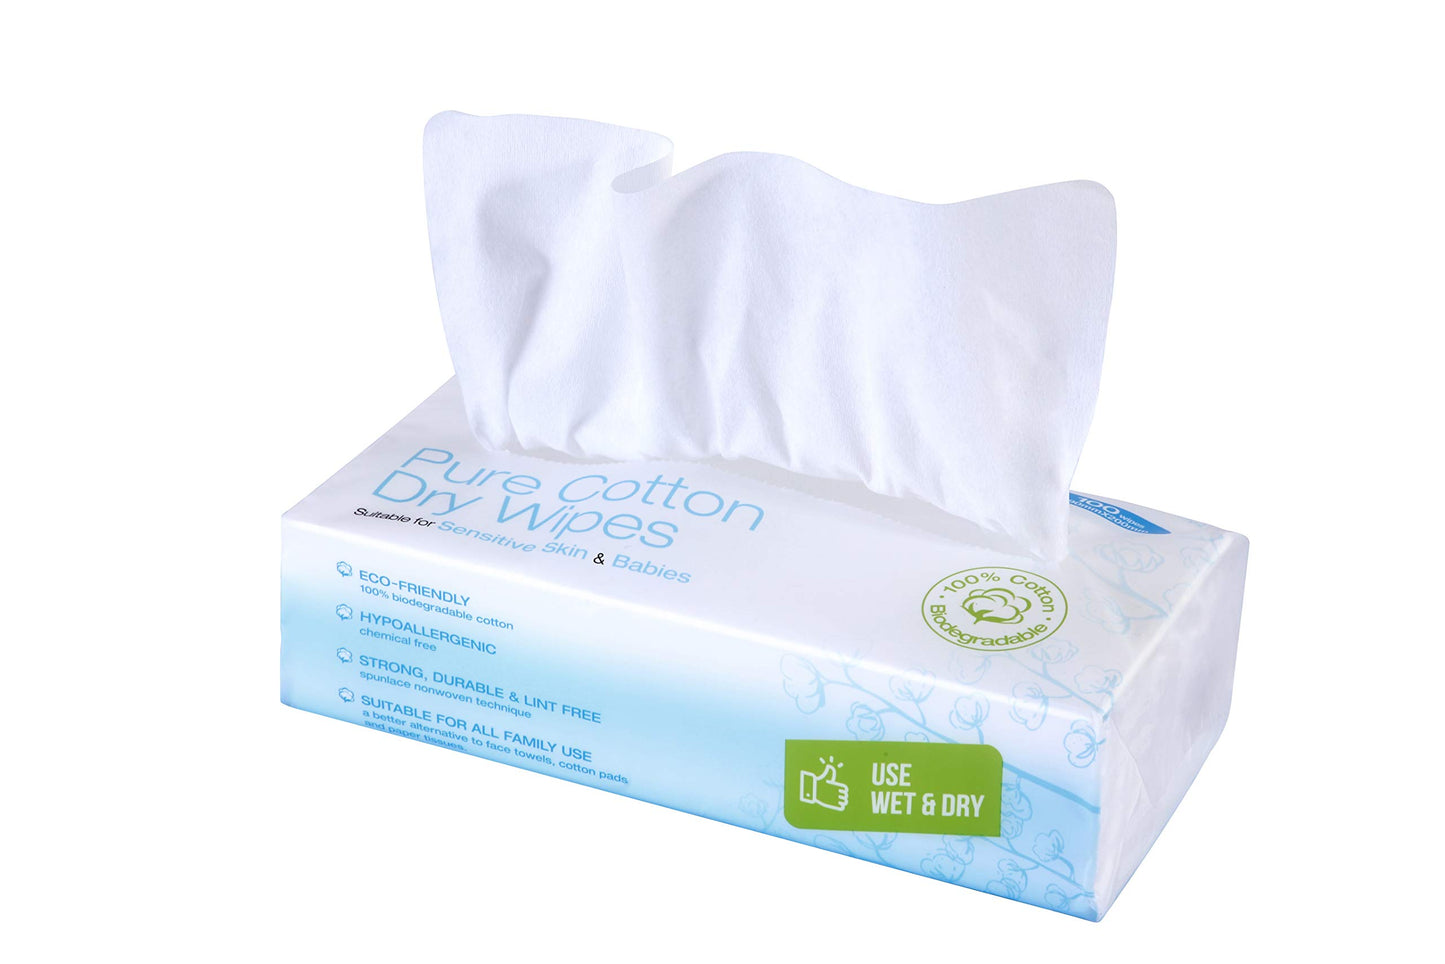 Ivyone Pure Cotton Dry Wipes, 100 Wipes, Biodegradable, Chemical-Free and Plastic-Free Wipes, Perfect for Newborn Sensitive Skin